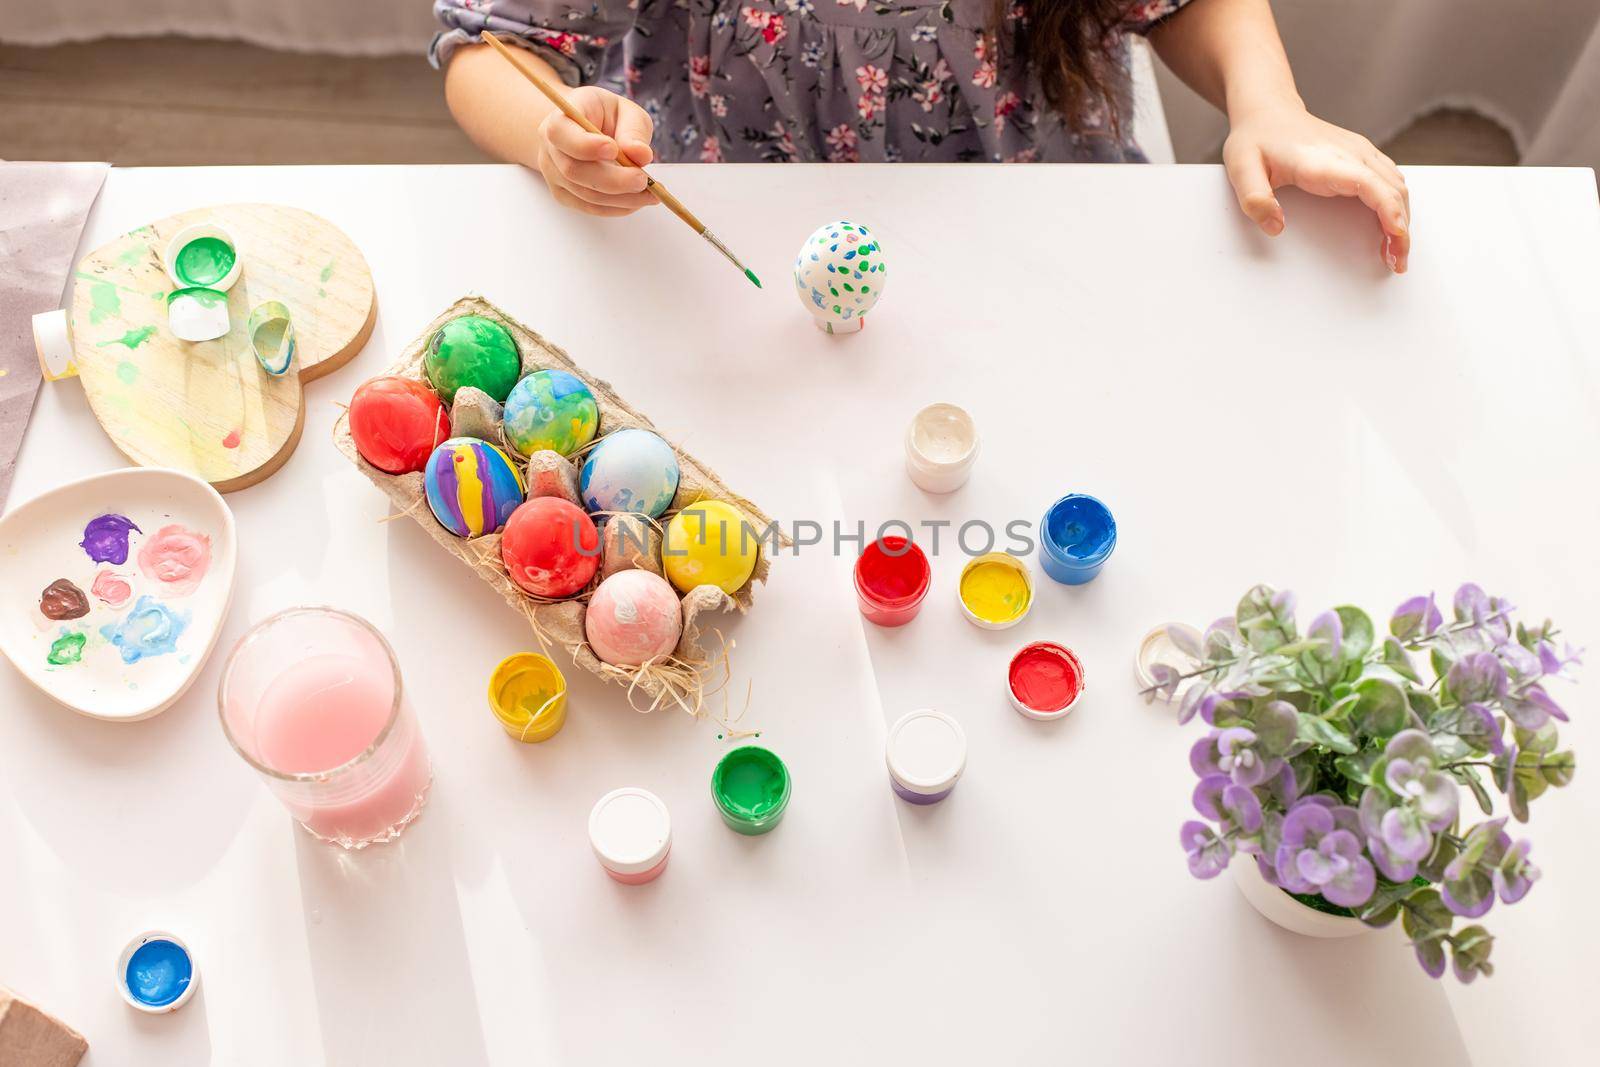 Hands of a little girl, with a painted egg, on a white table with multi-colored eggs in a tray, brushes and paints. Top view